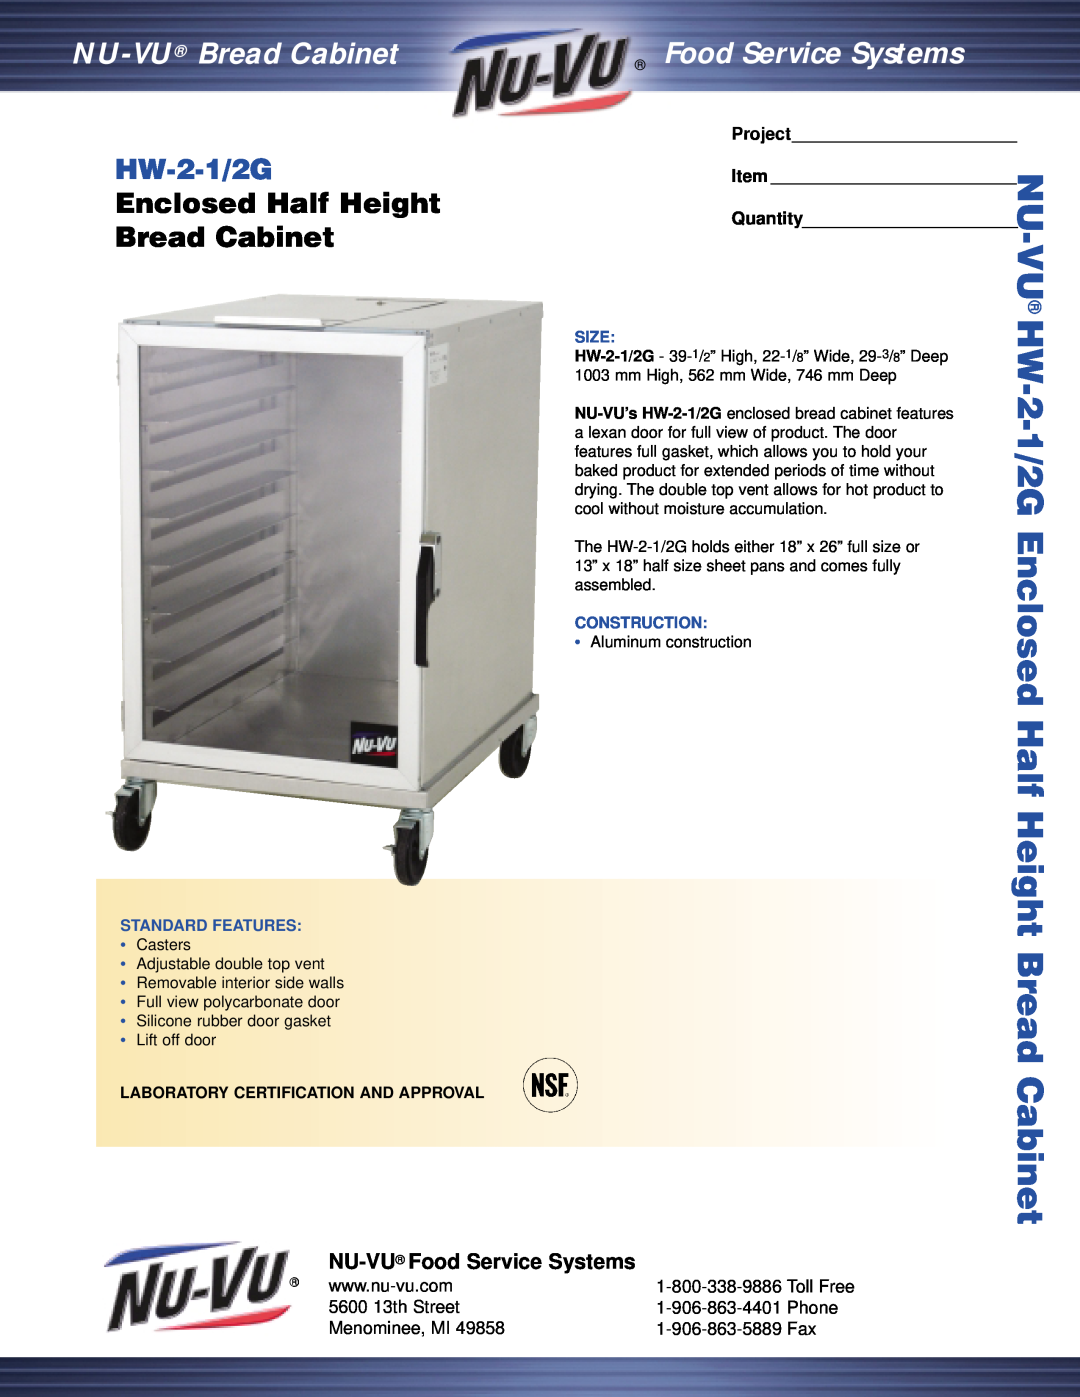 Middleby Cooking Systems Group HW-2-1/2G manual Enclosed Half Height Bread Cabinet, NU-VU Food Service Systems, Phone 